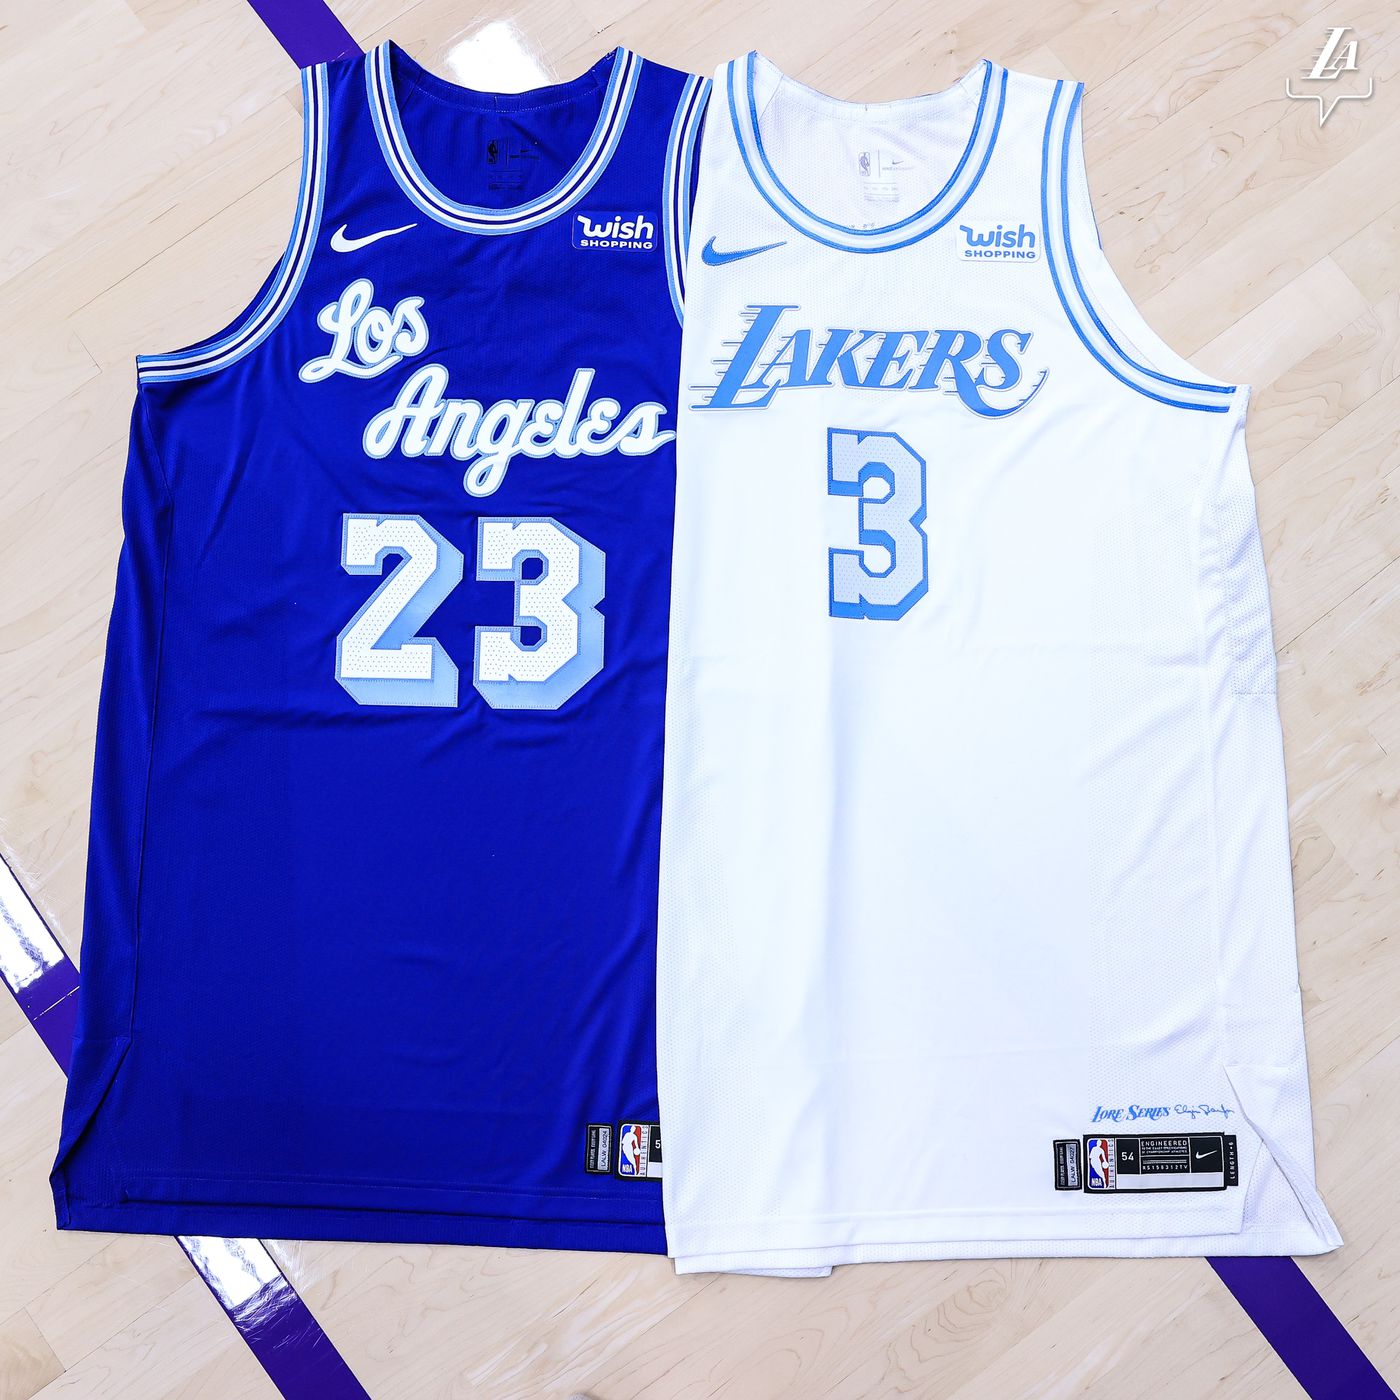 New Elgin Baylor inspired Lakers jerseys are fresh take on classic ...